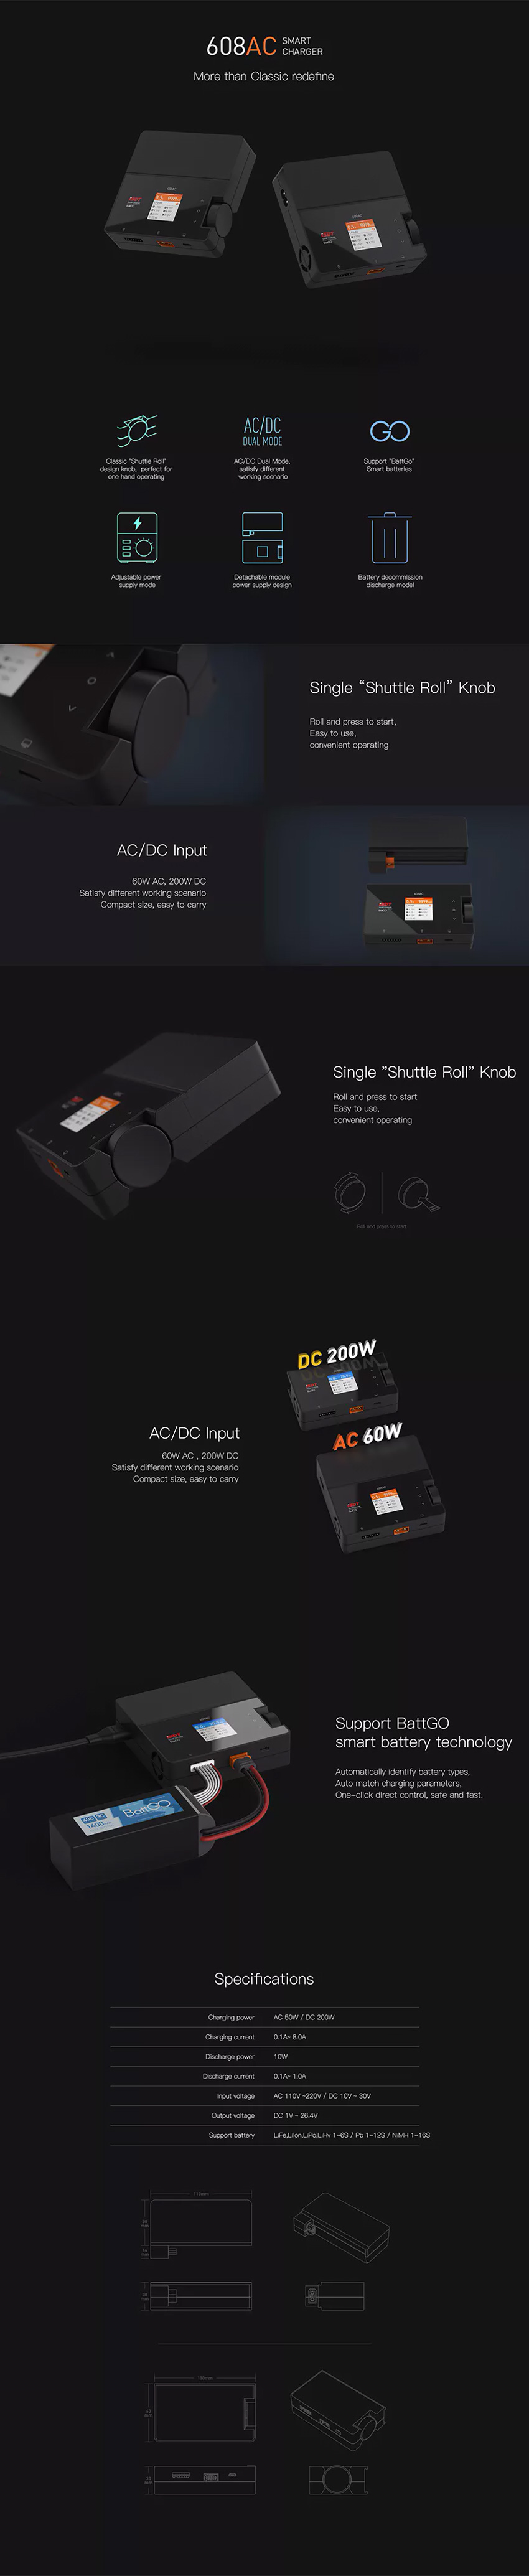 608AC Smart Charger